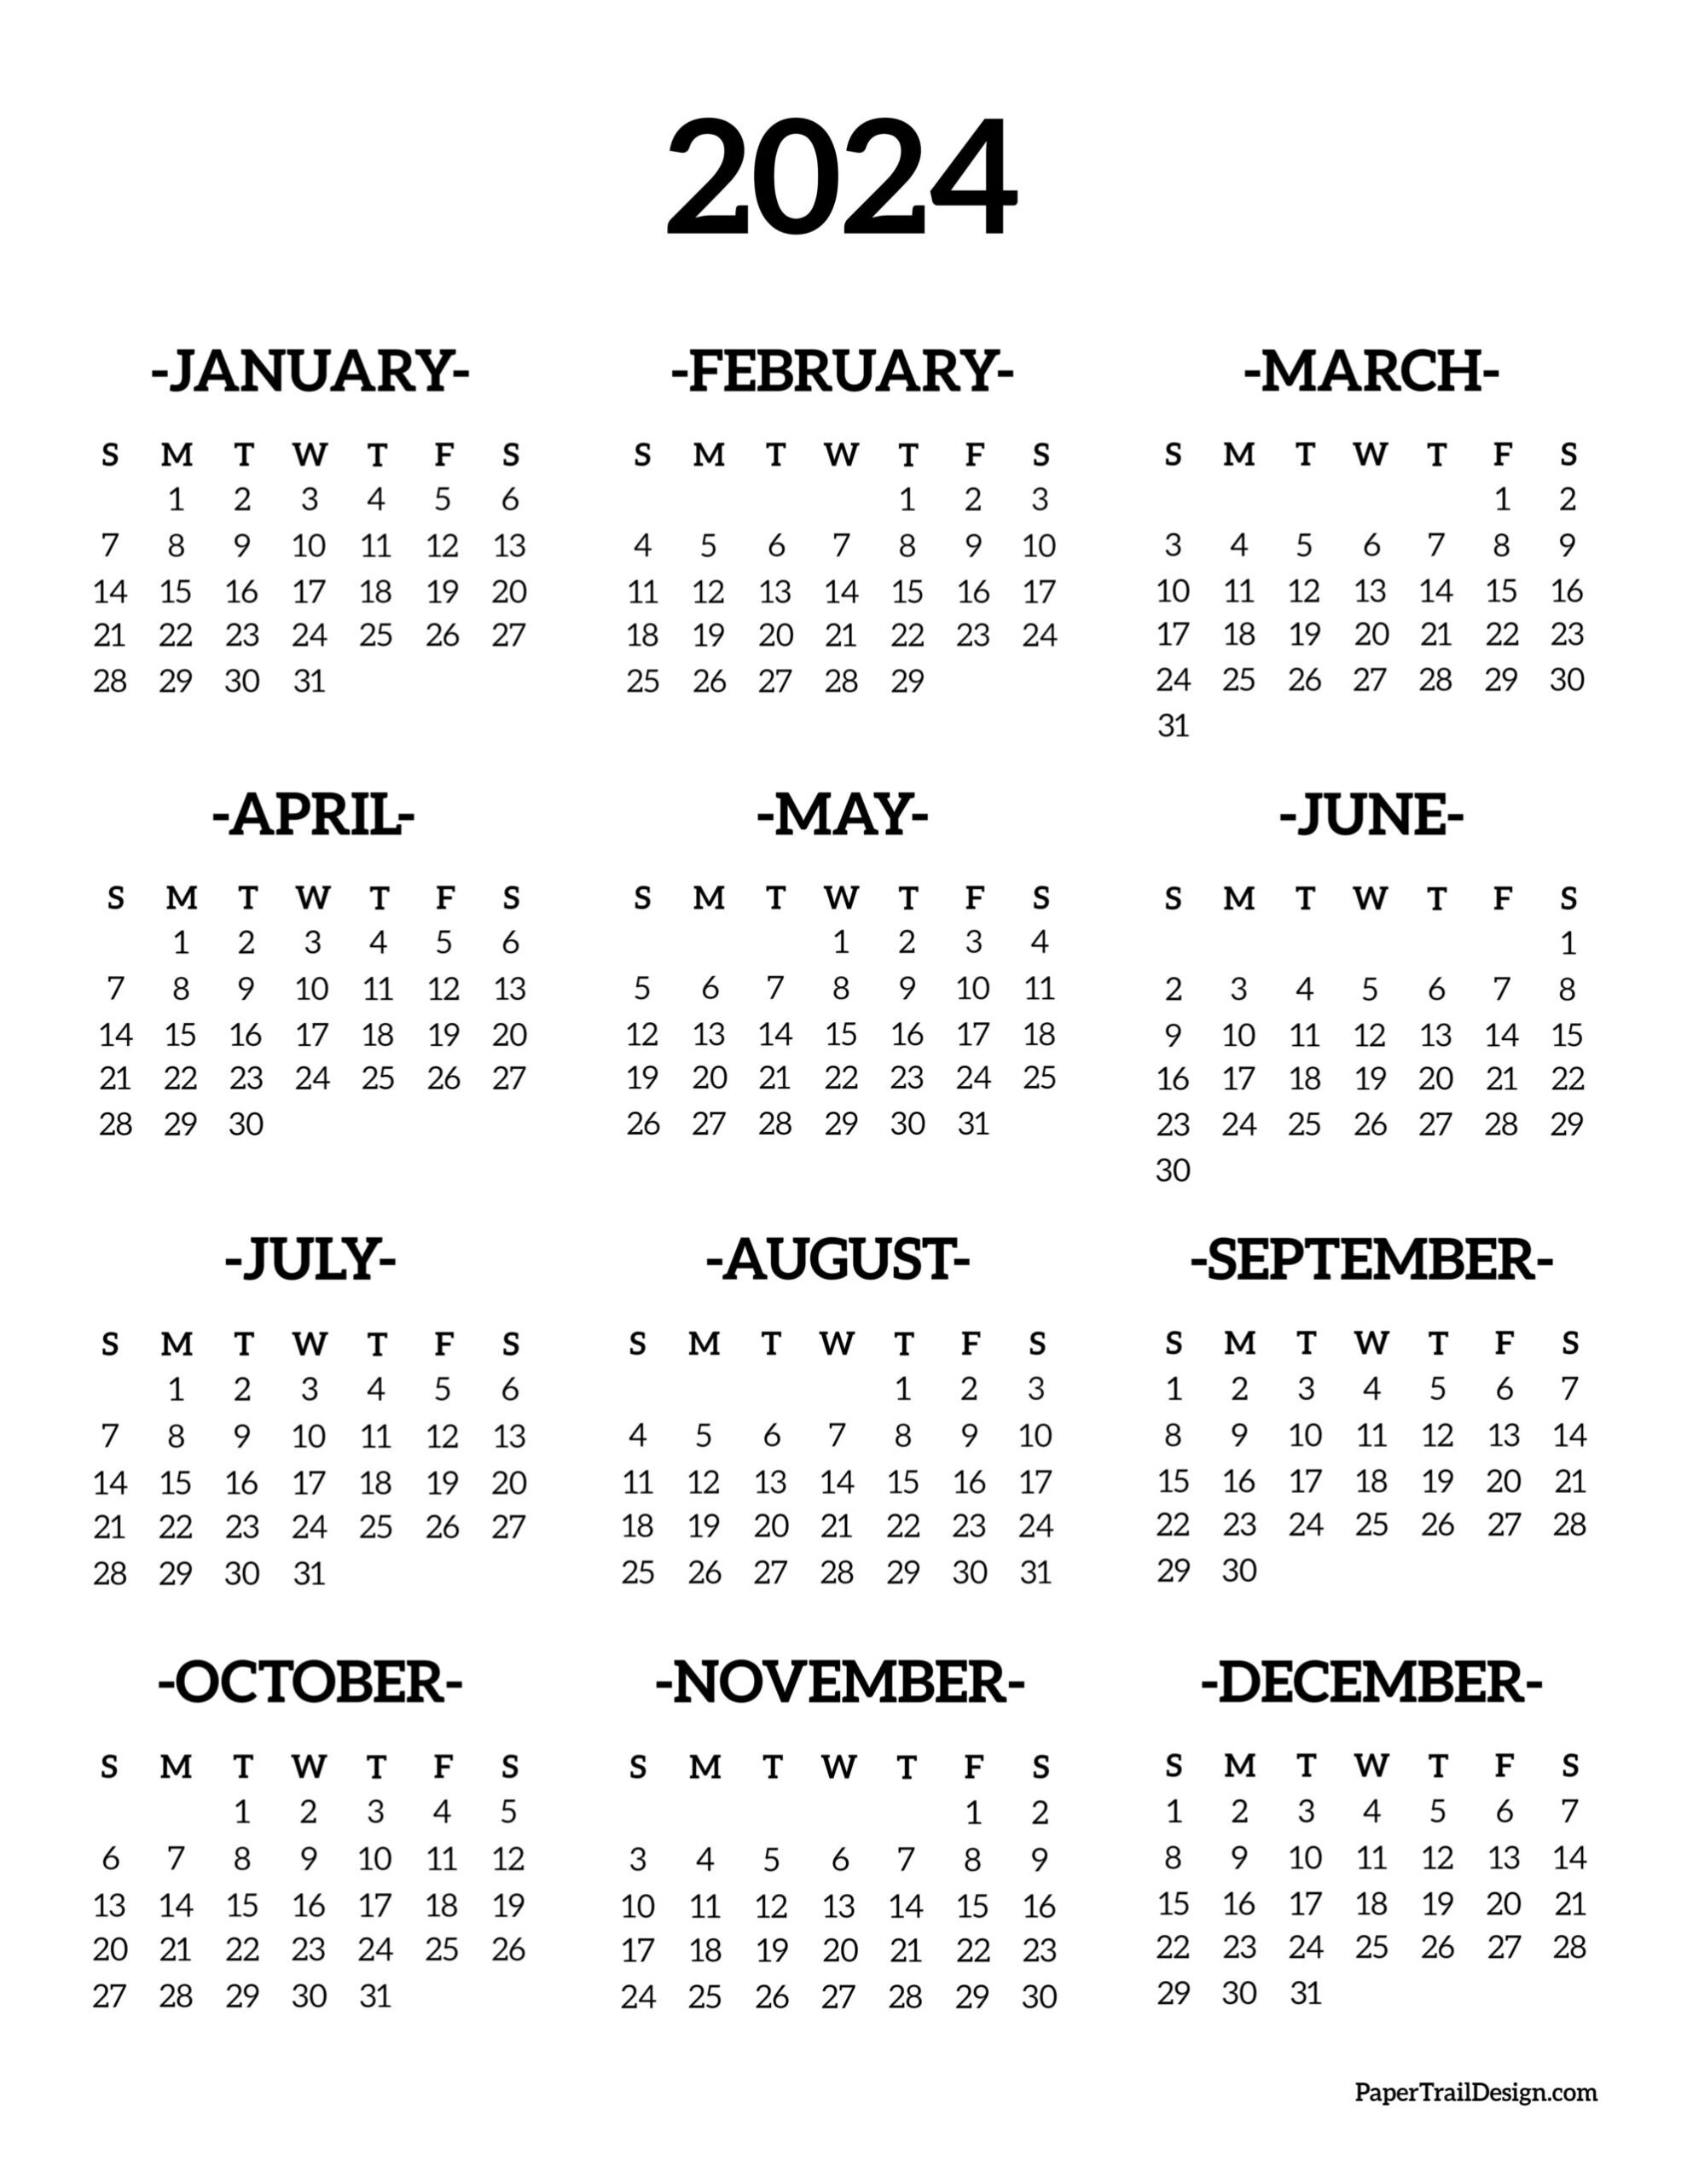 Calendar 2024 Printable One Page - Paper Trail Design | Yearly Overview Calendar 2024